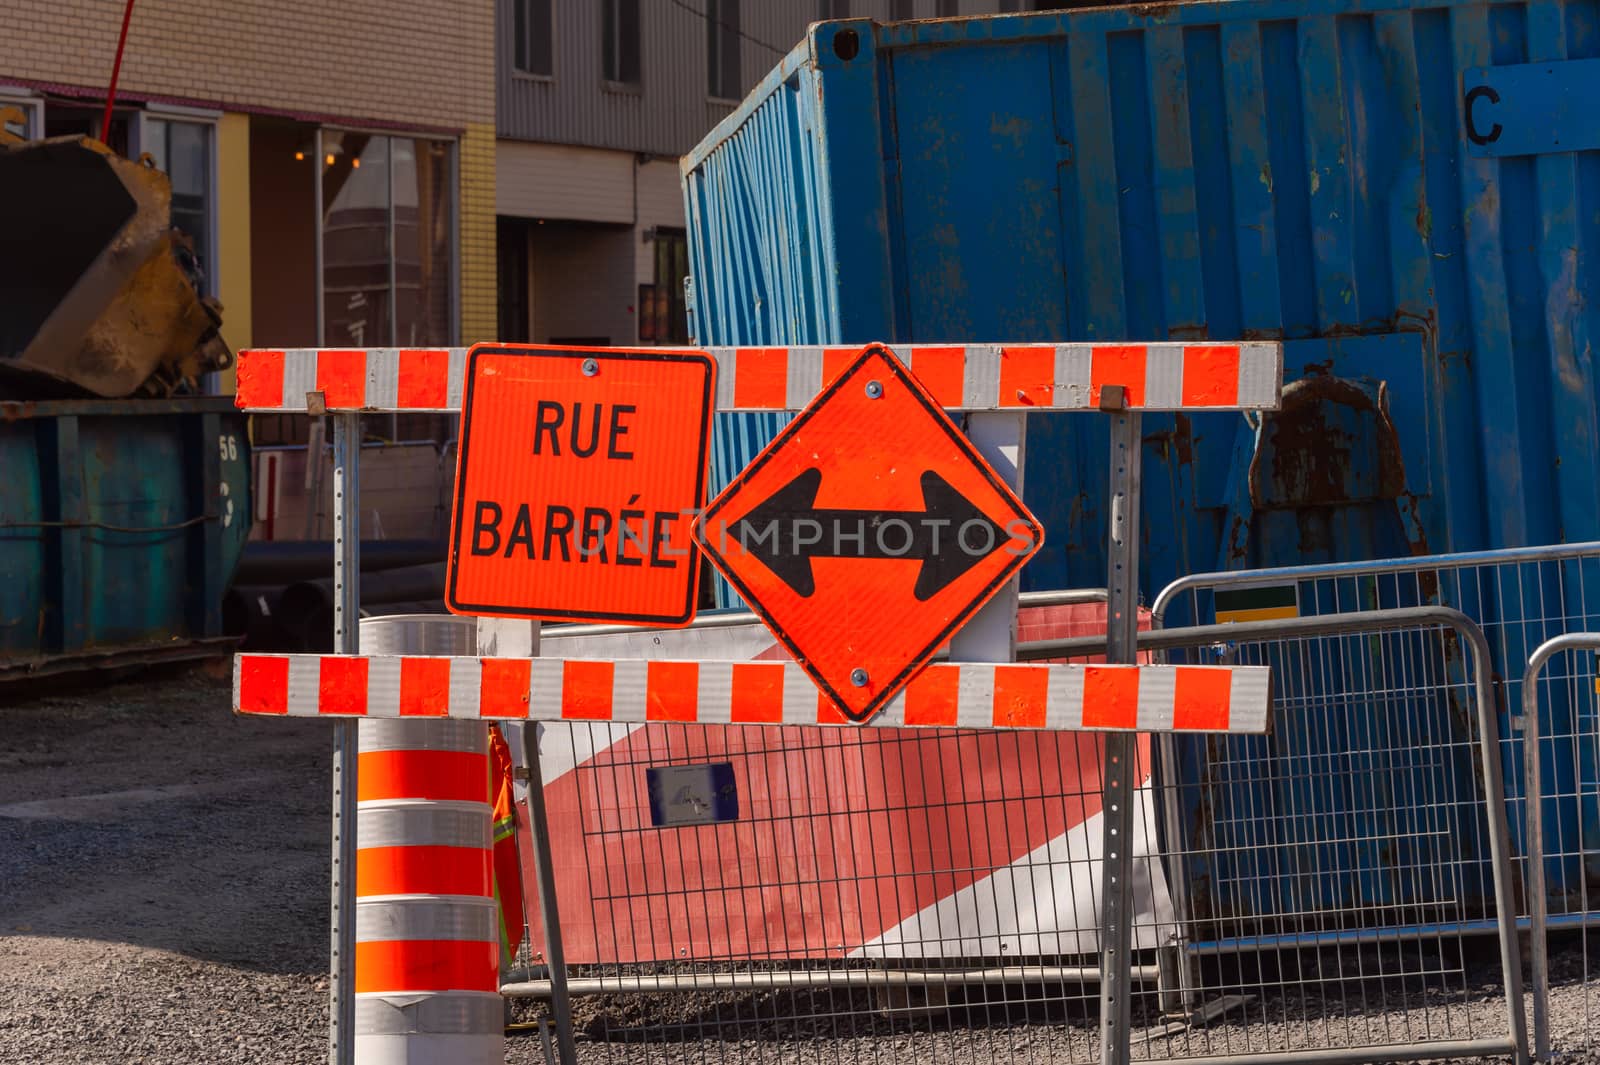 Construction site on Saint-Hubert street. "Rue Barrée" means closed road in french.